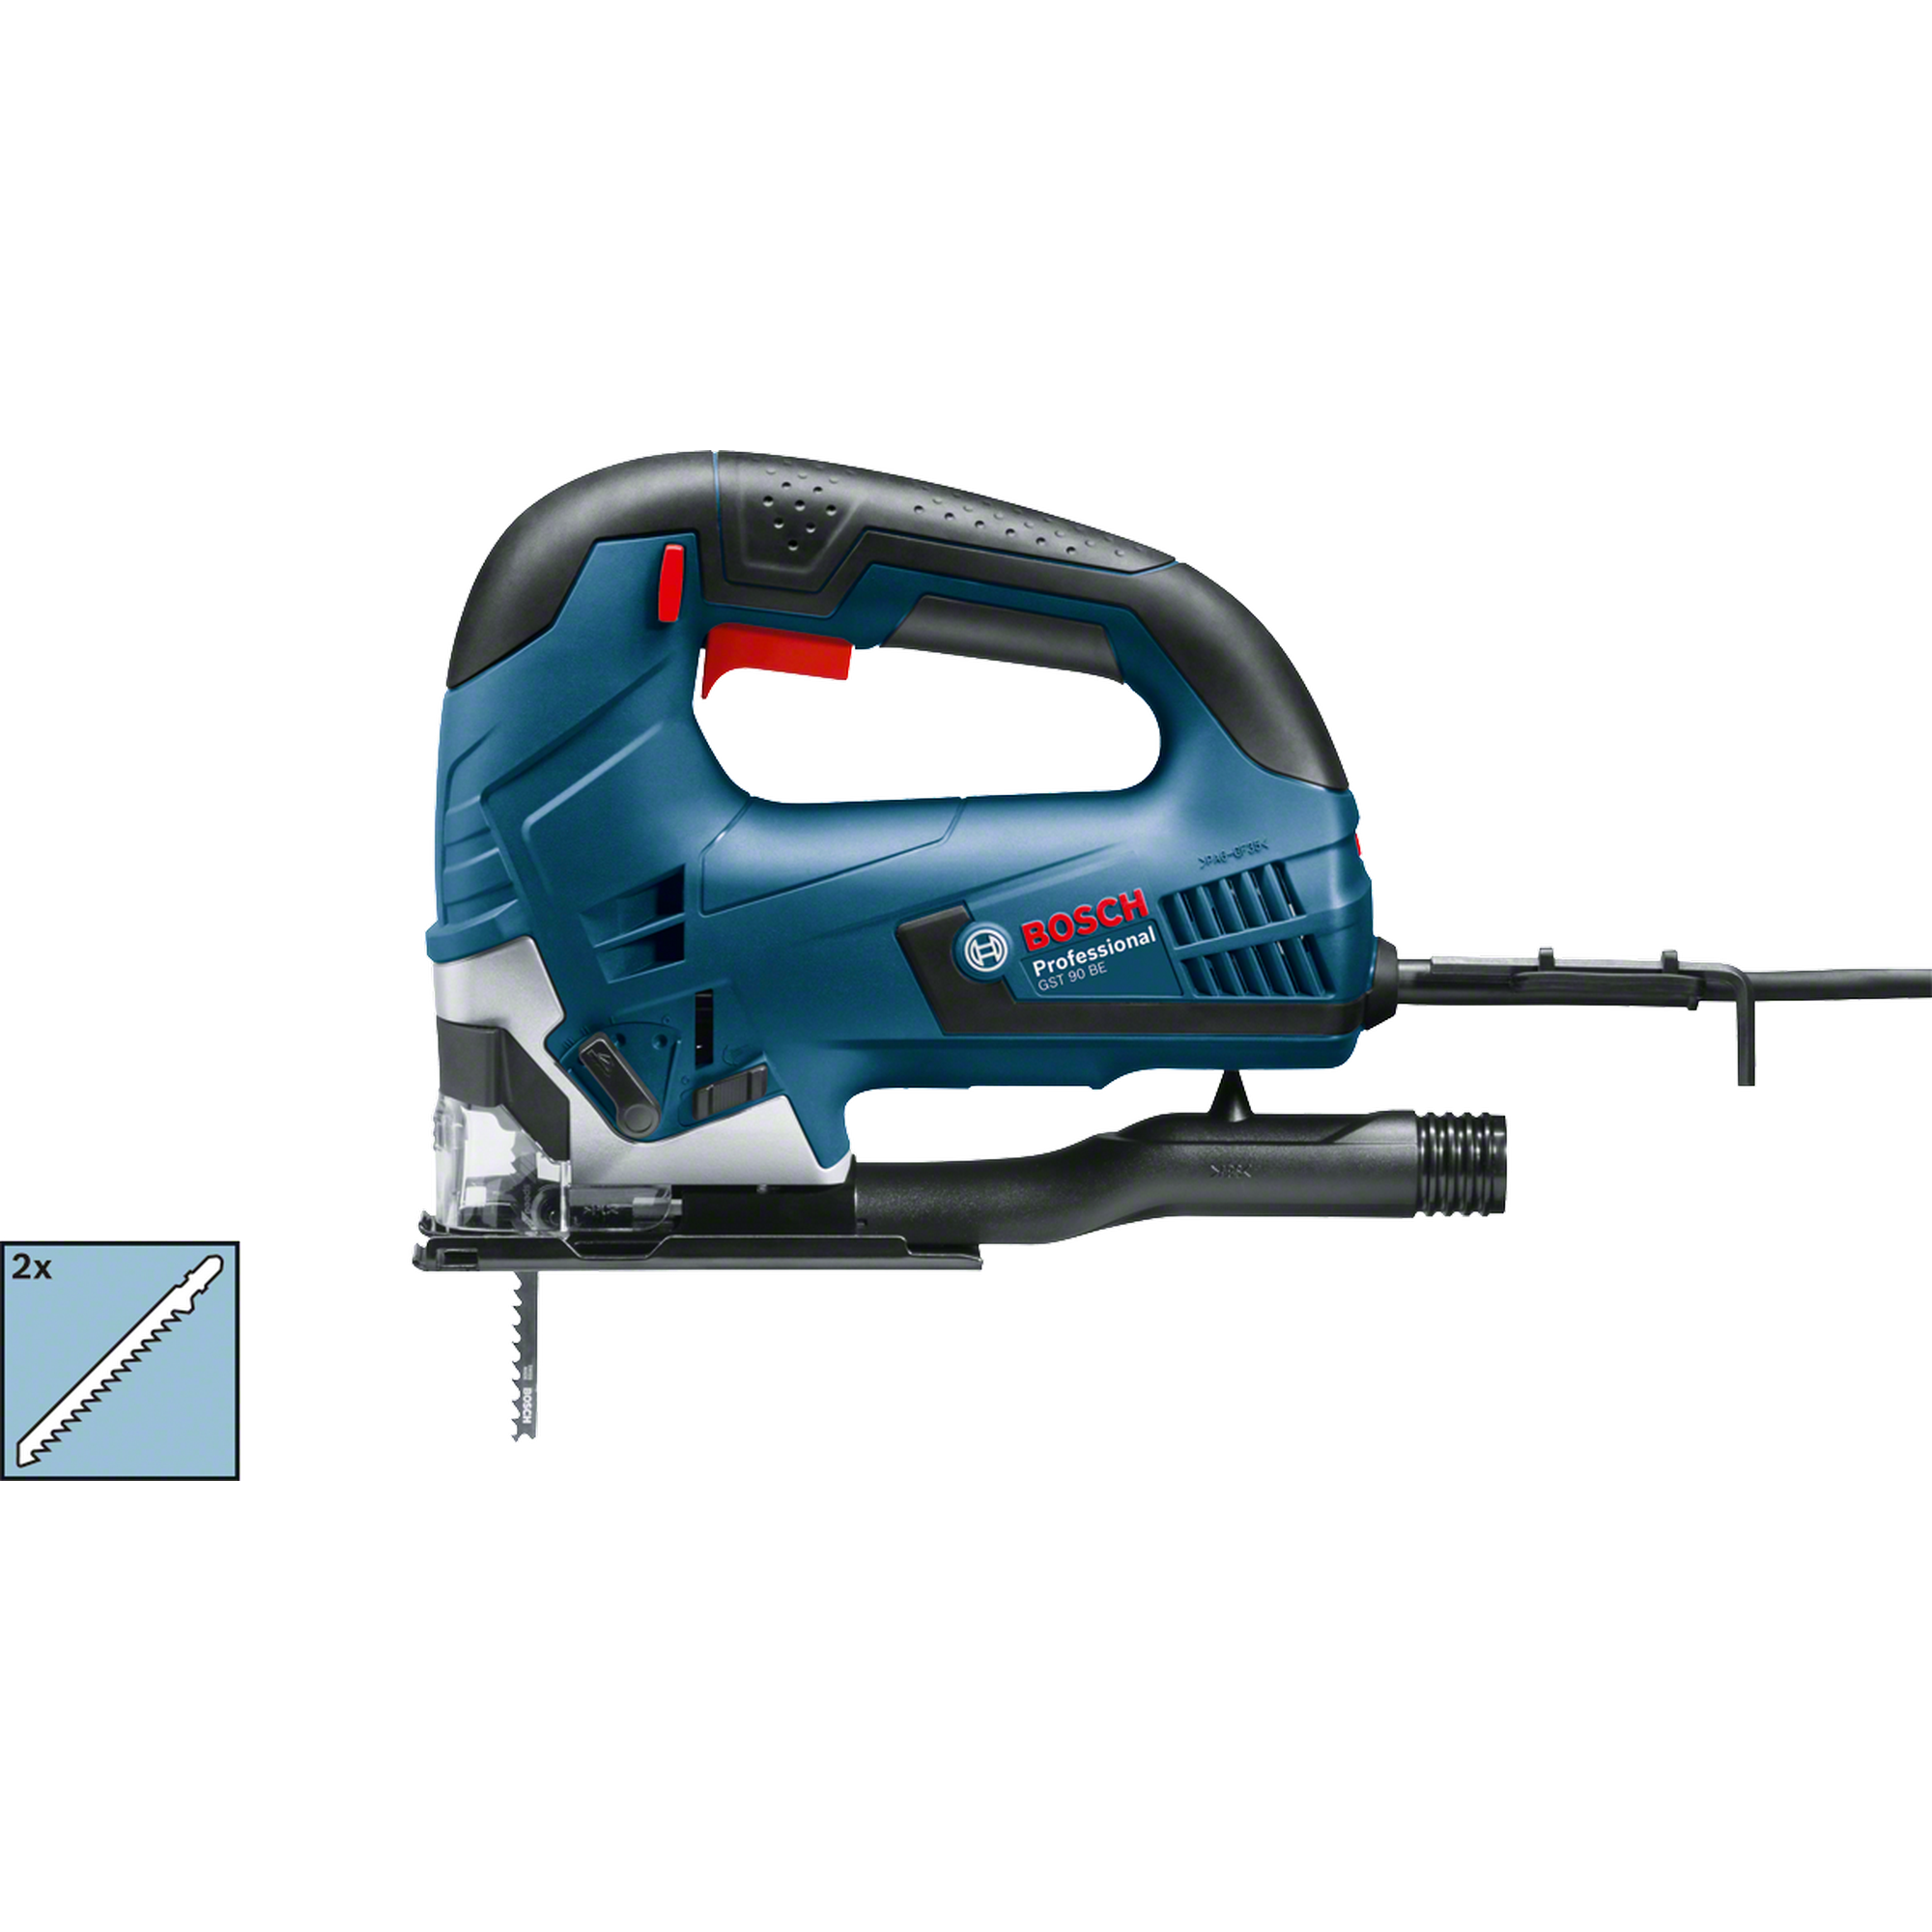 Stichsäge 'Professional GST 90 BE' blau 650 W, inkl. Transportkoffer + product picture